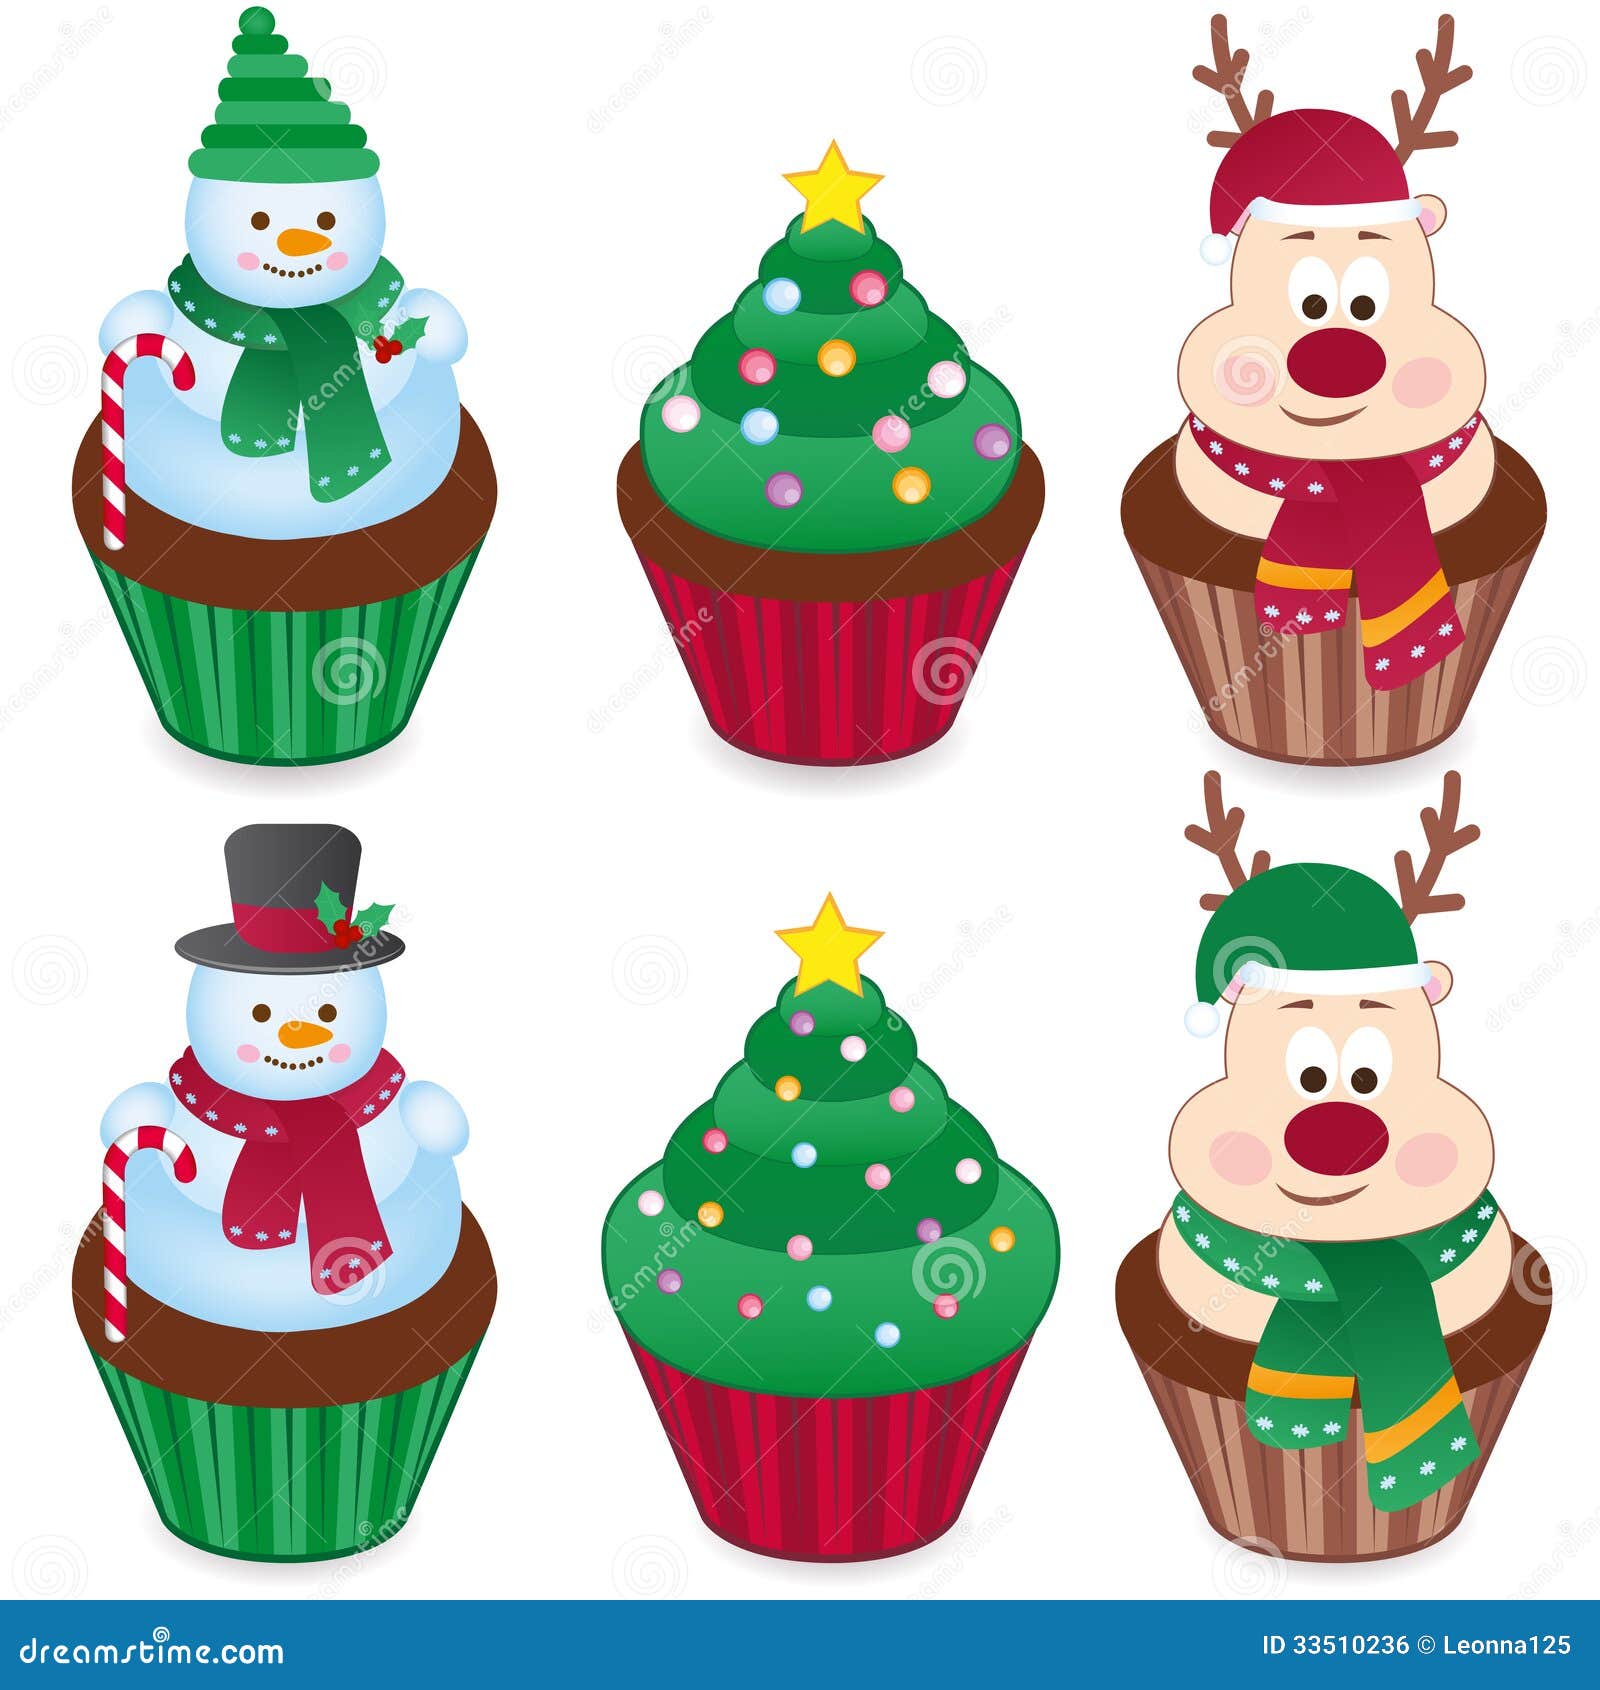 clipart christmas cakes free - photo #12